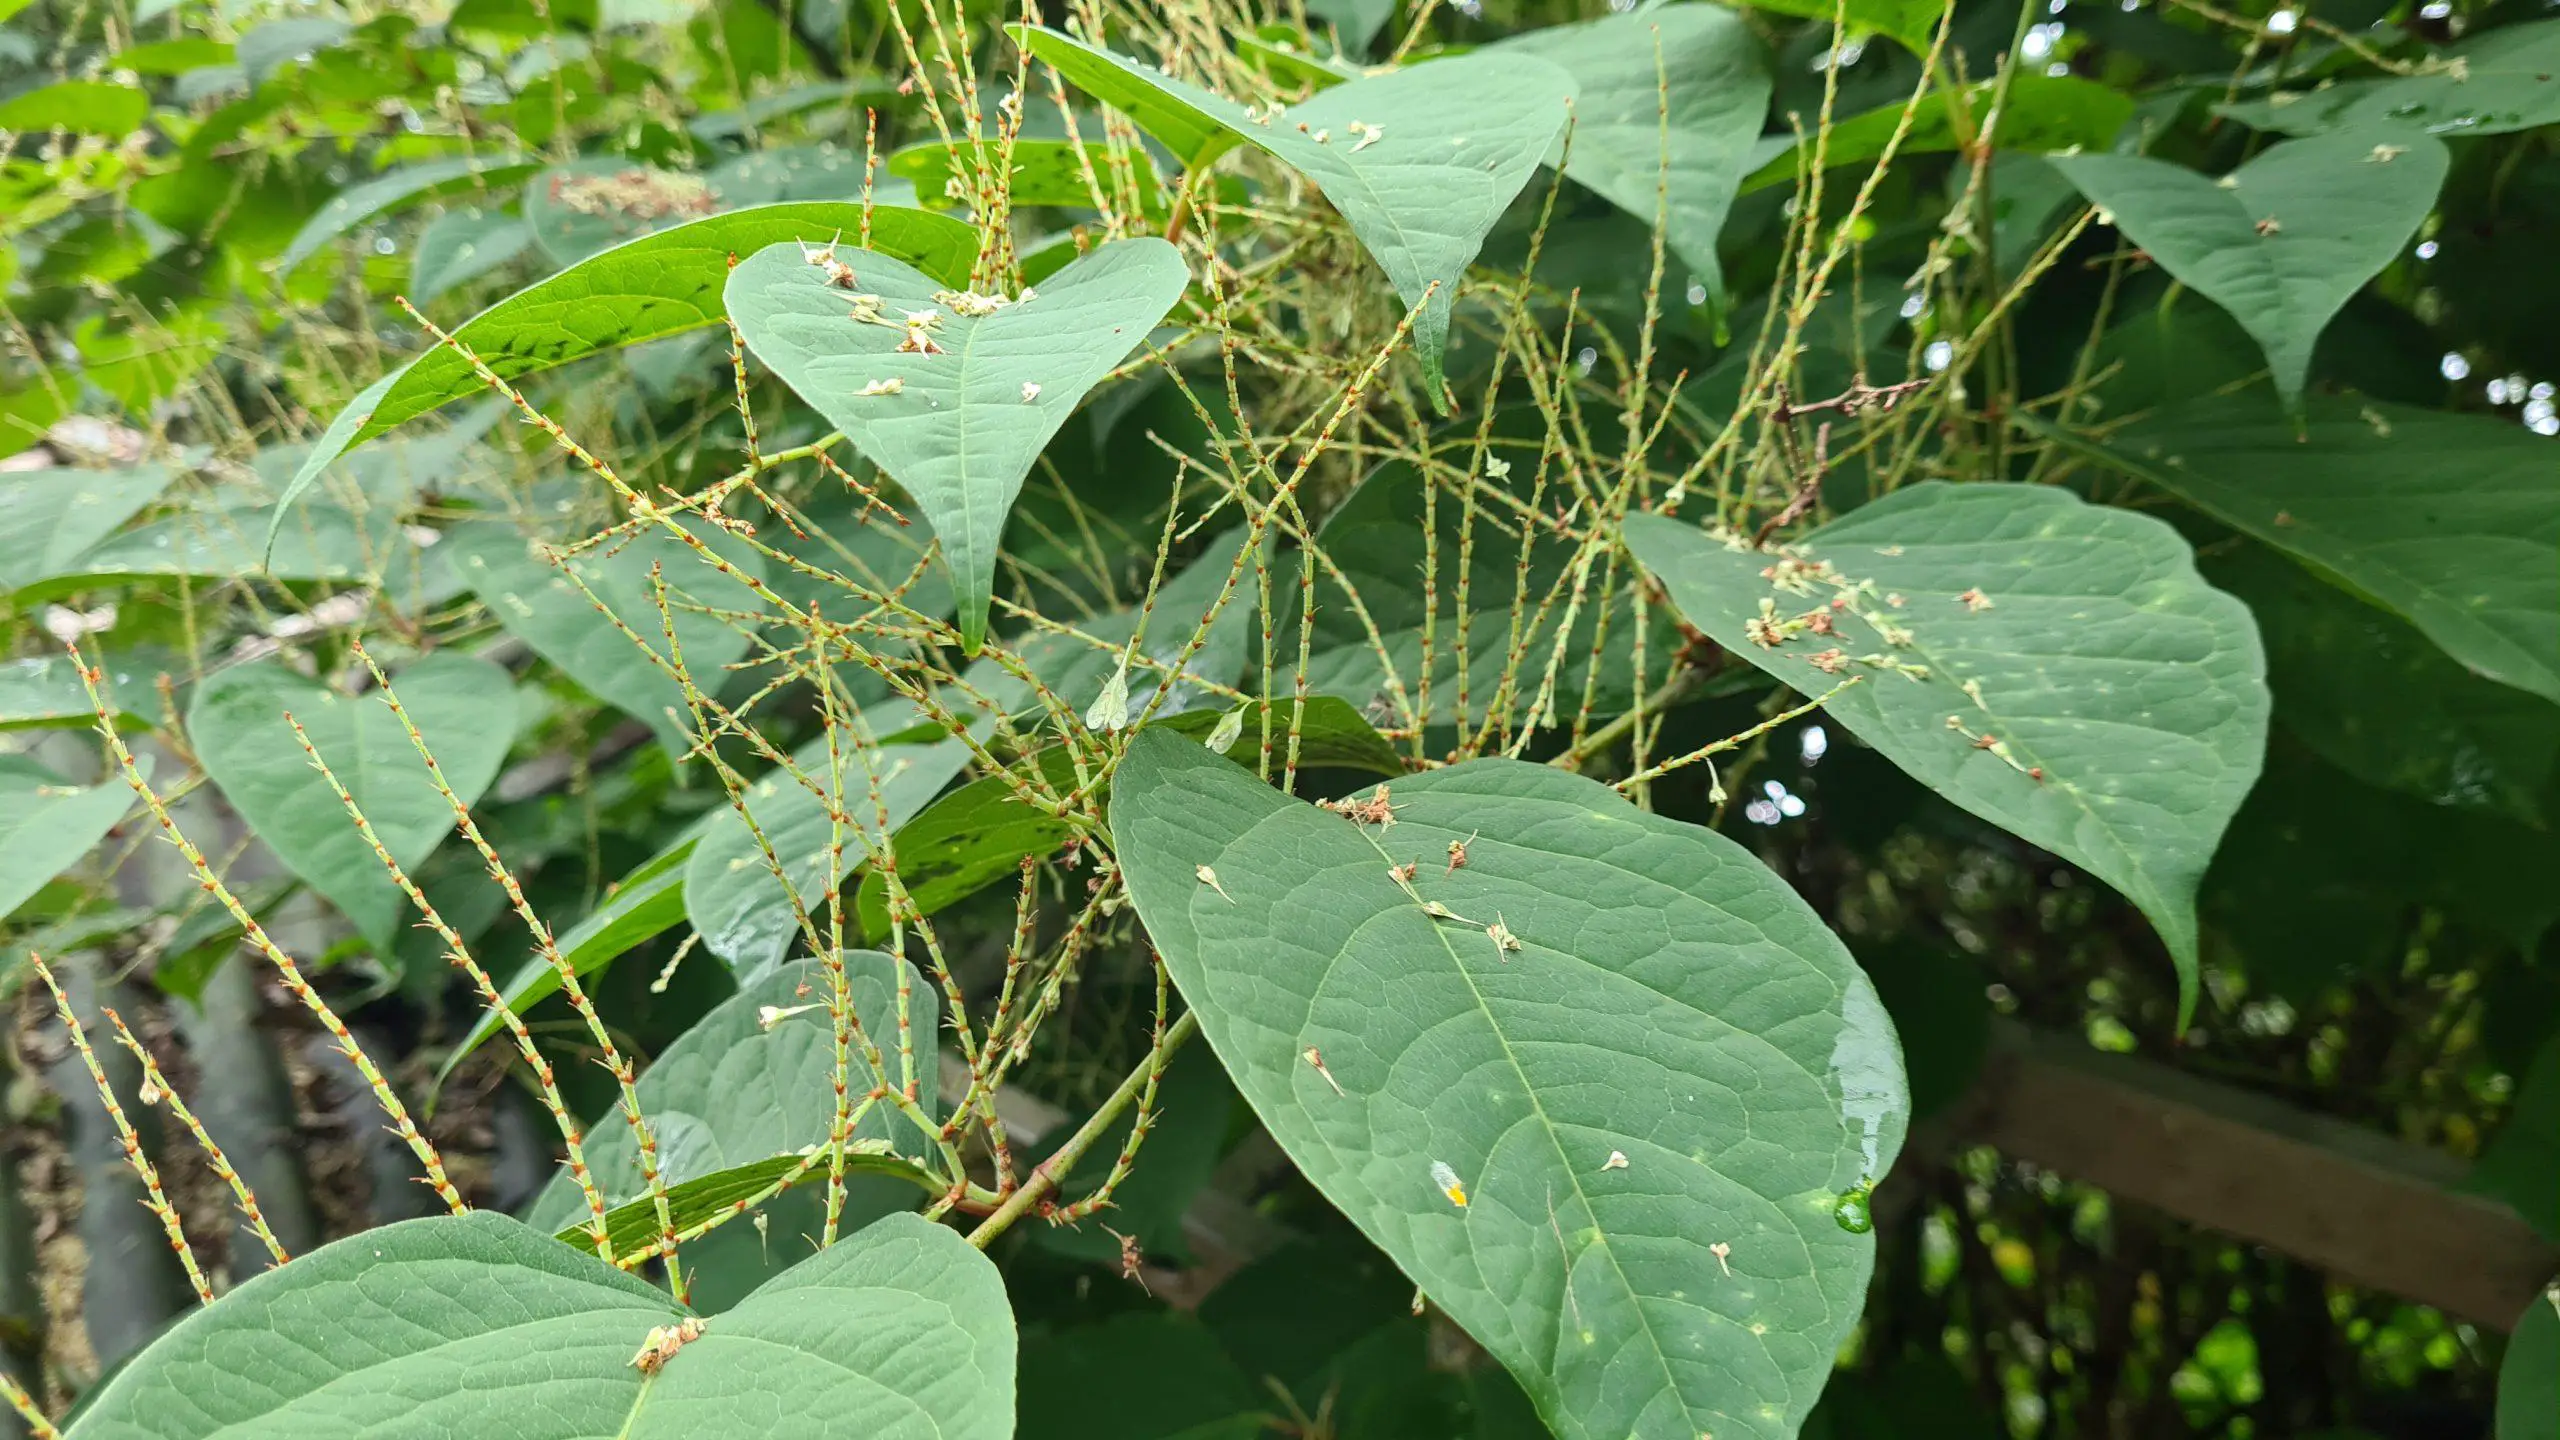 Japanese knotweed invasive plants can quickly take over your garden scaled